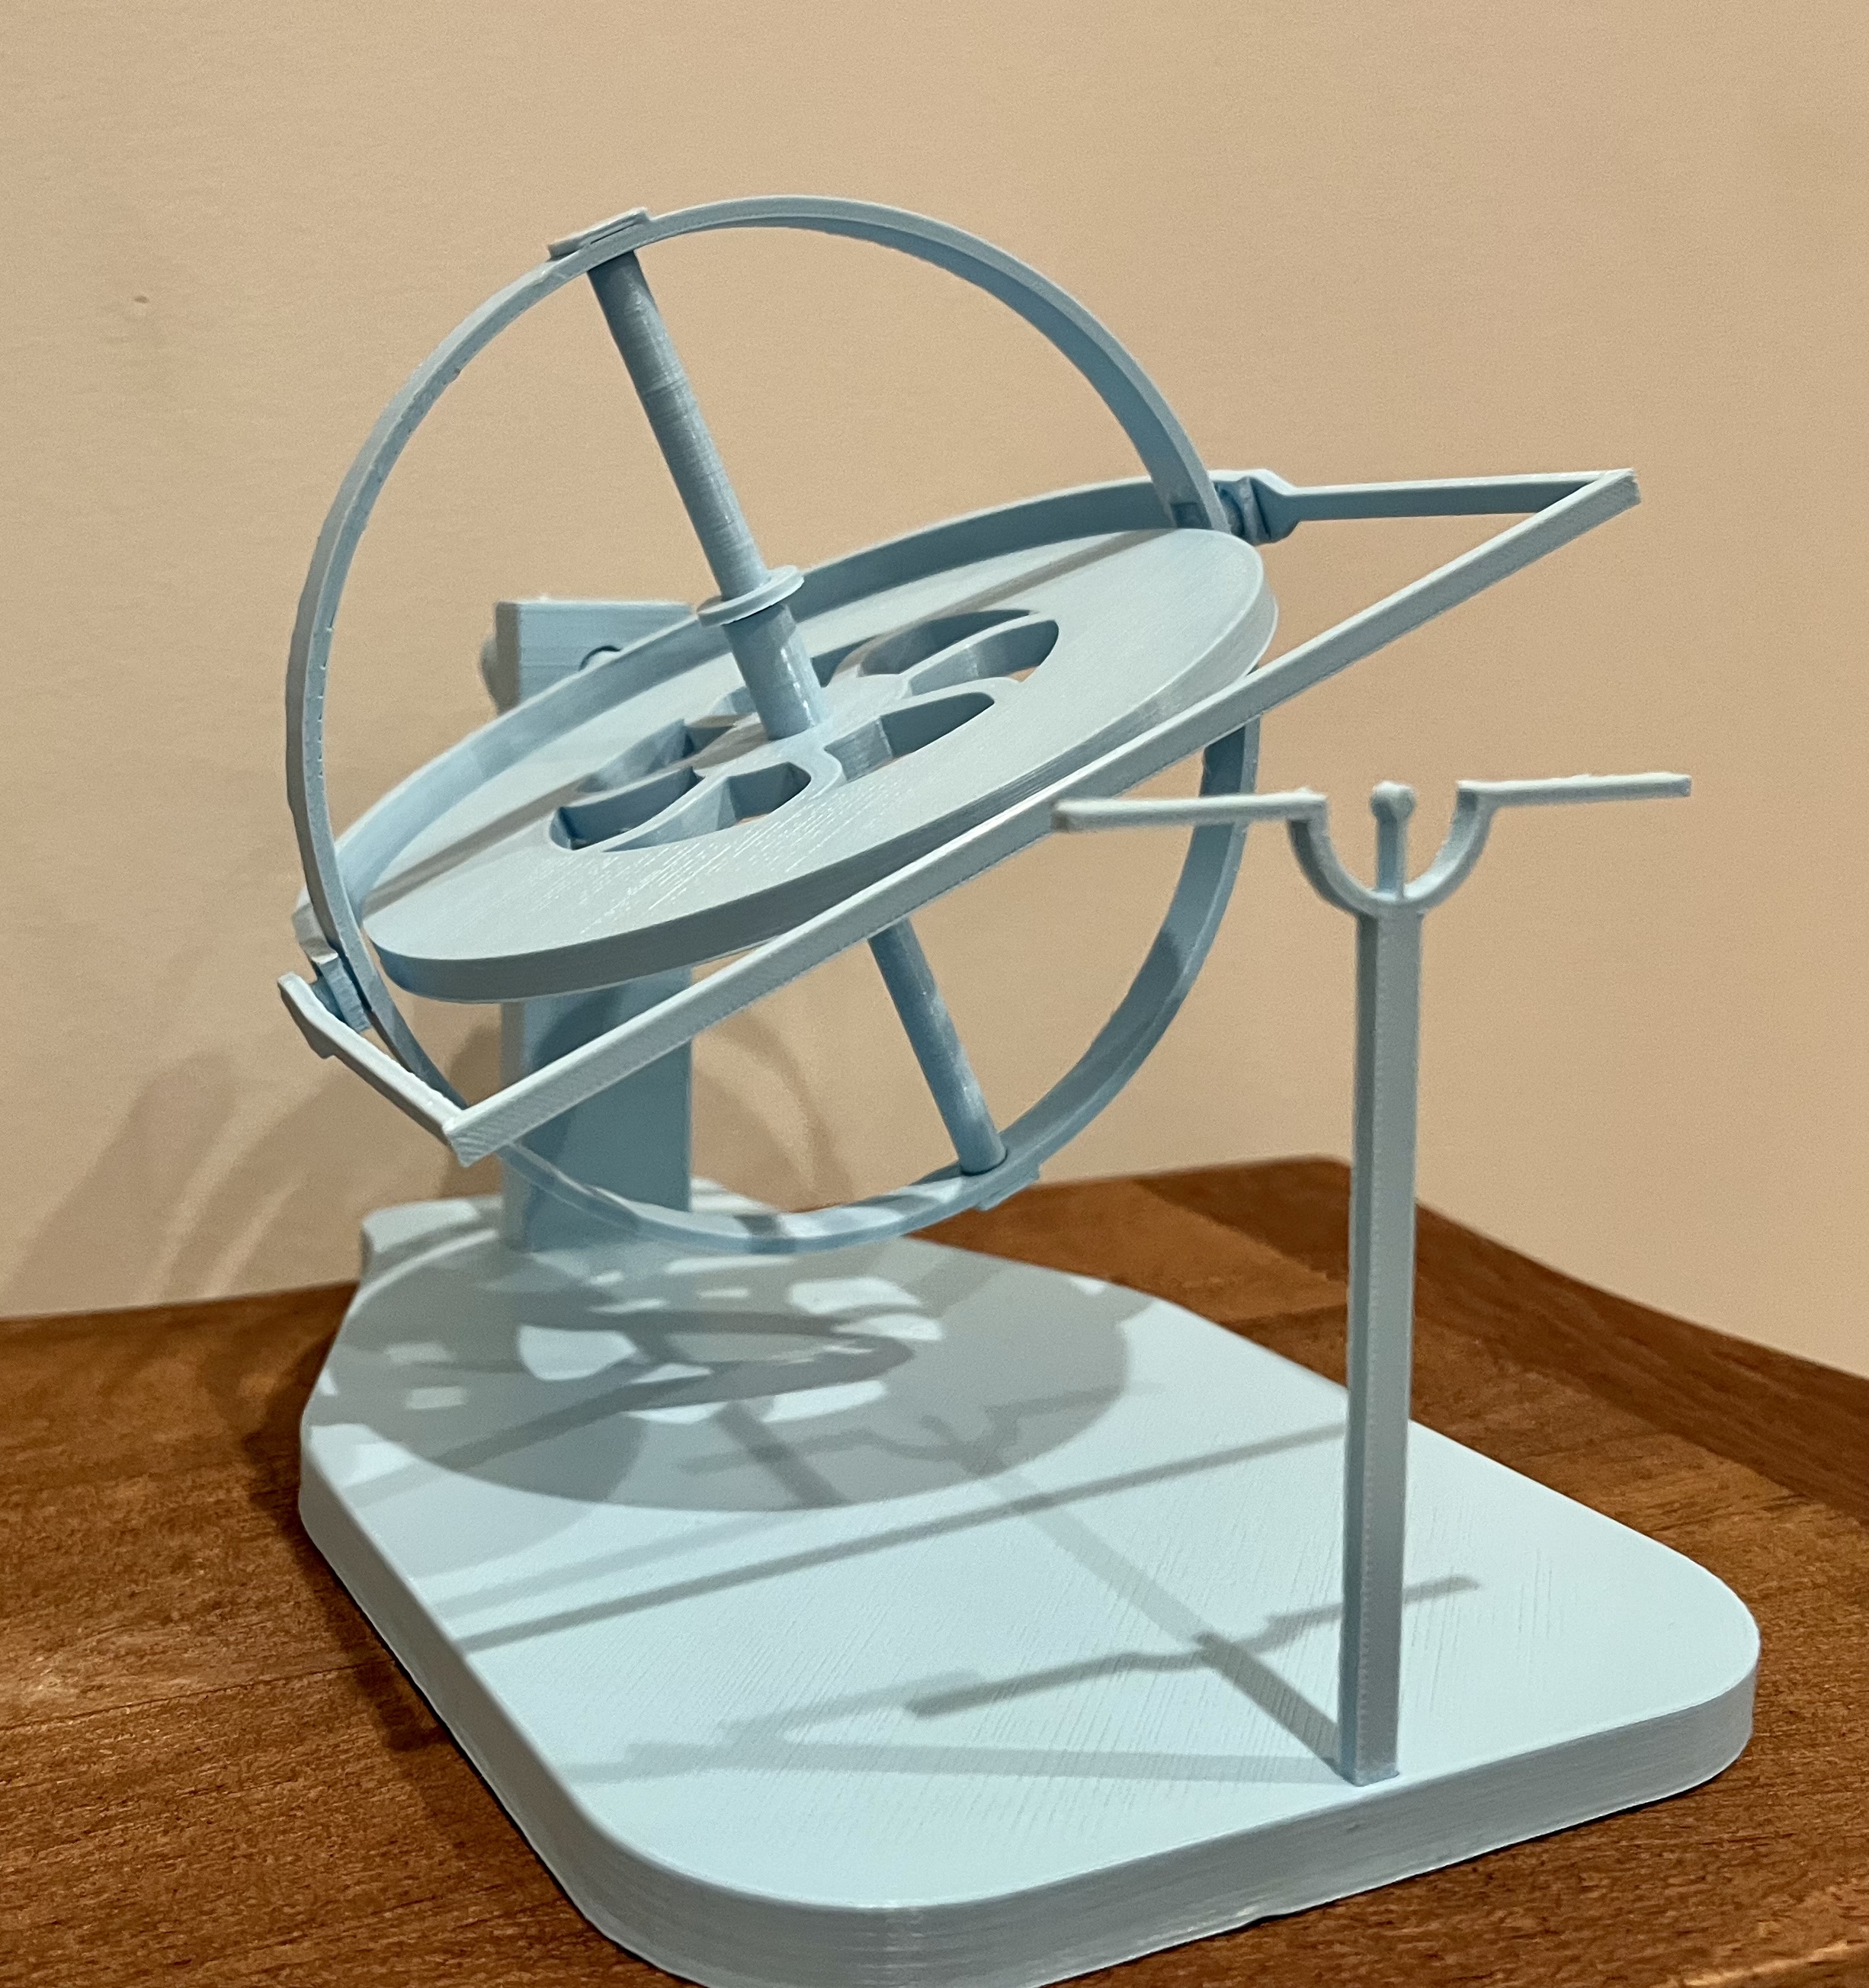 Functional Model of Aircraft's Gyro